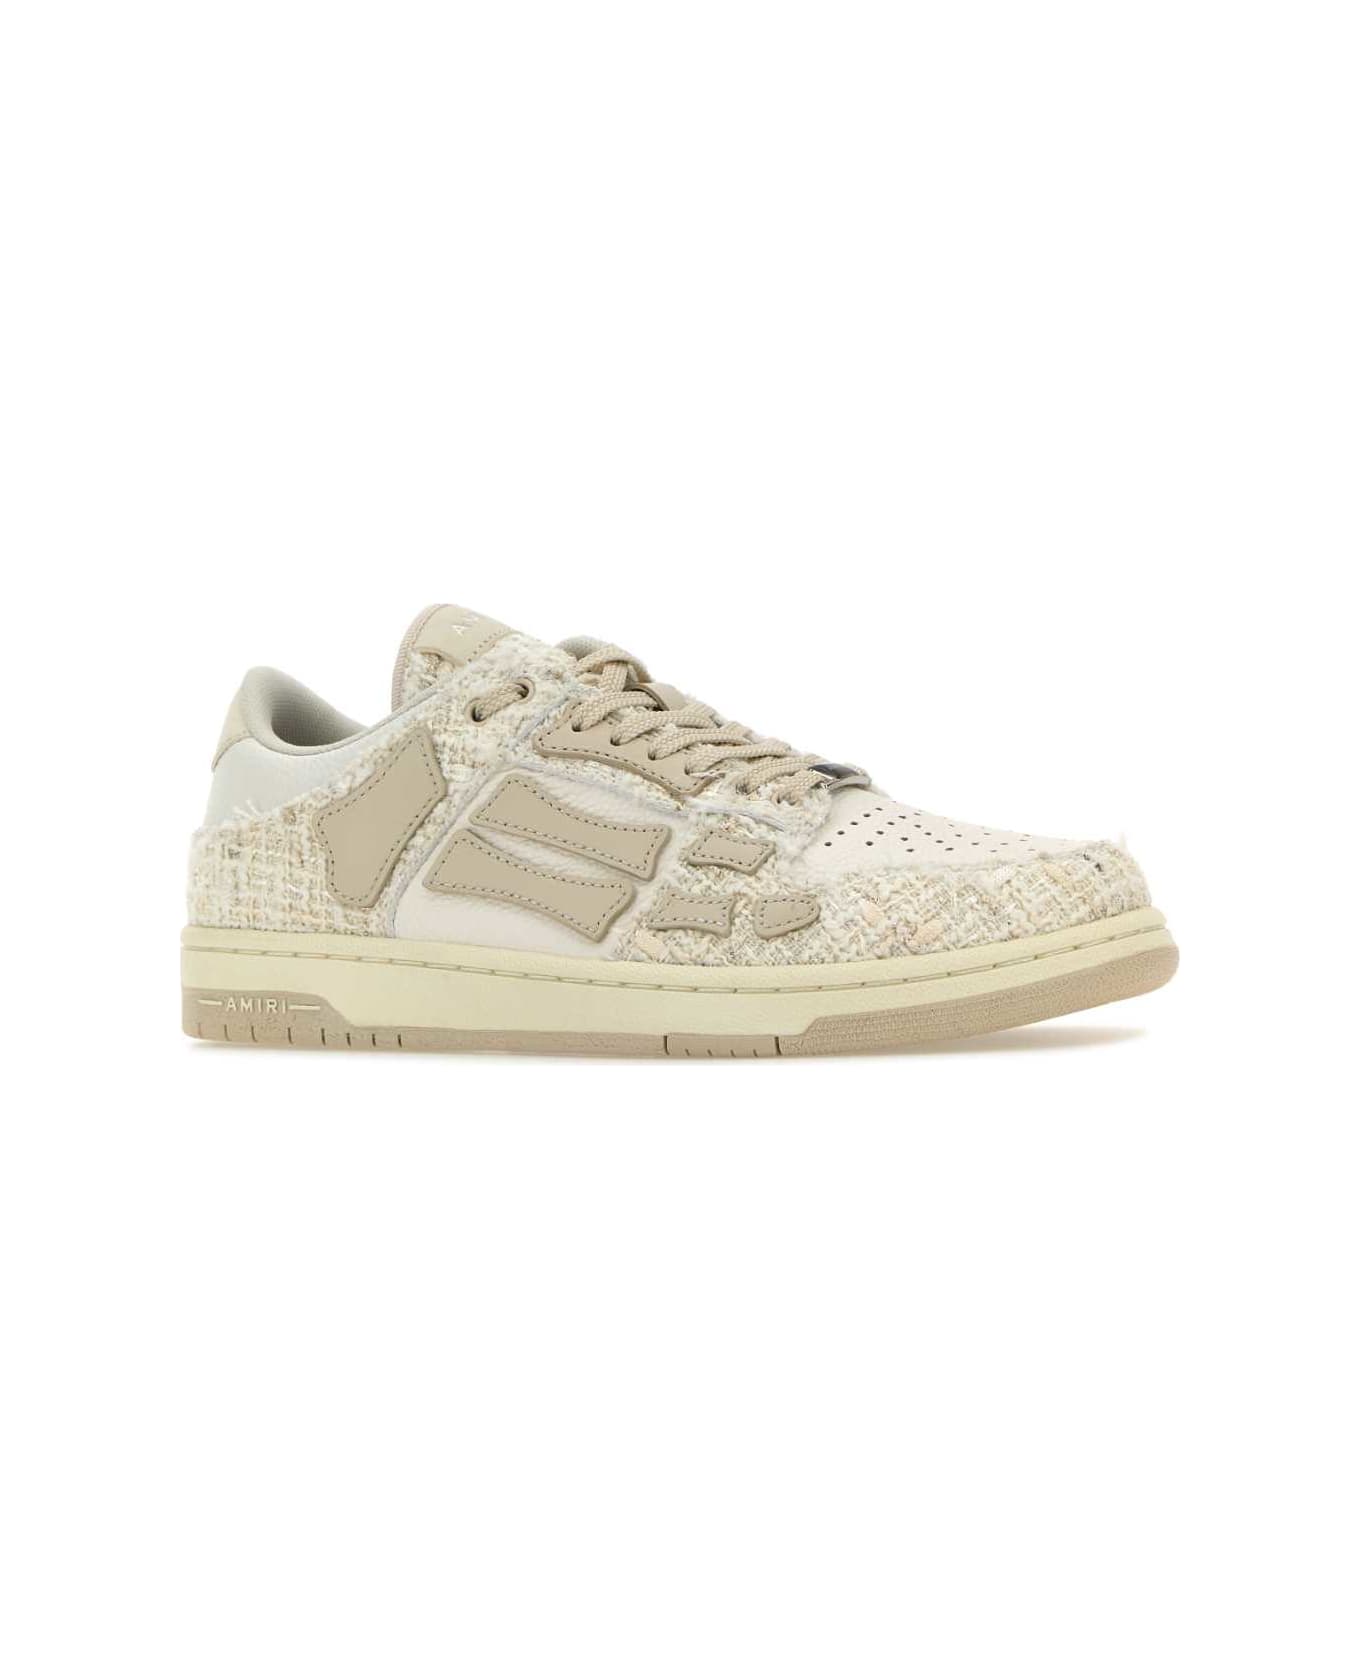 AMIRI Multicolor Leather And Fabric Skel Sneakers - ALABASTER